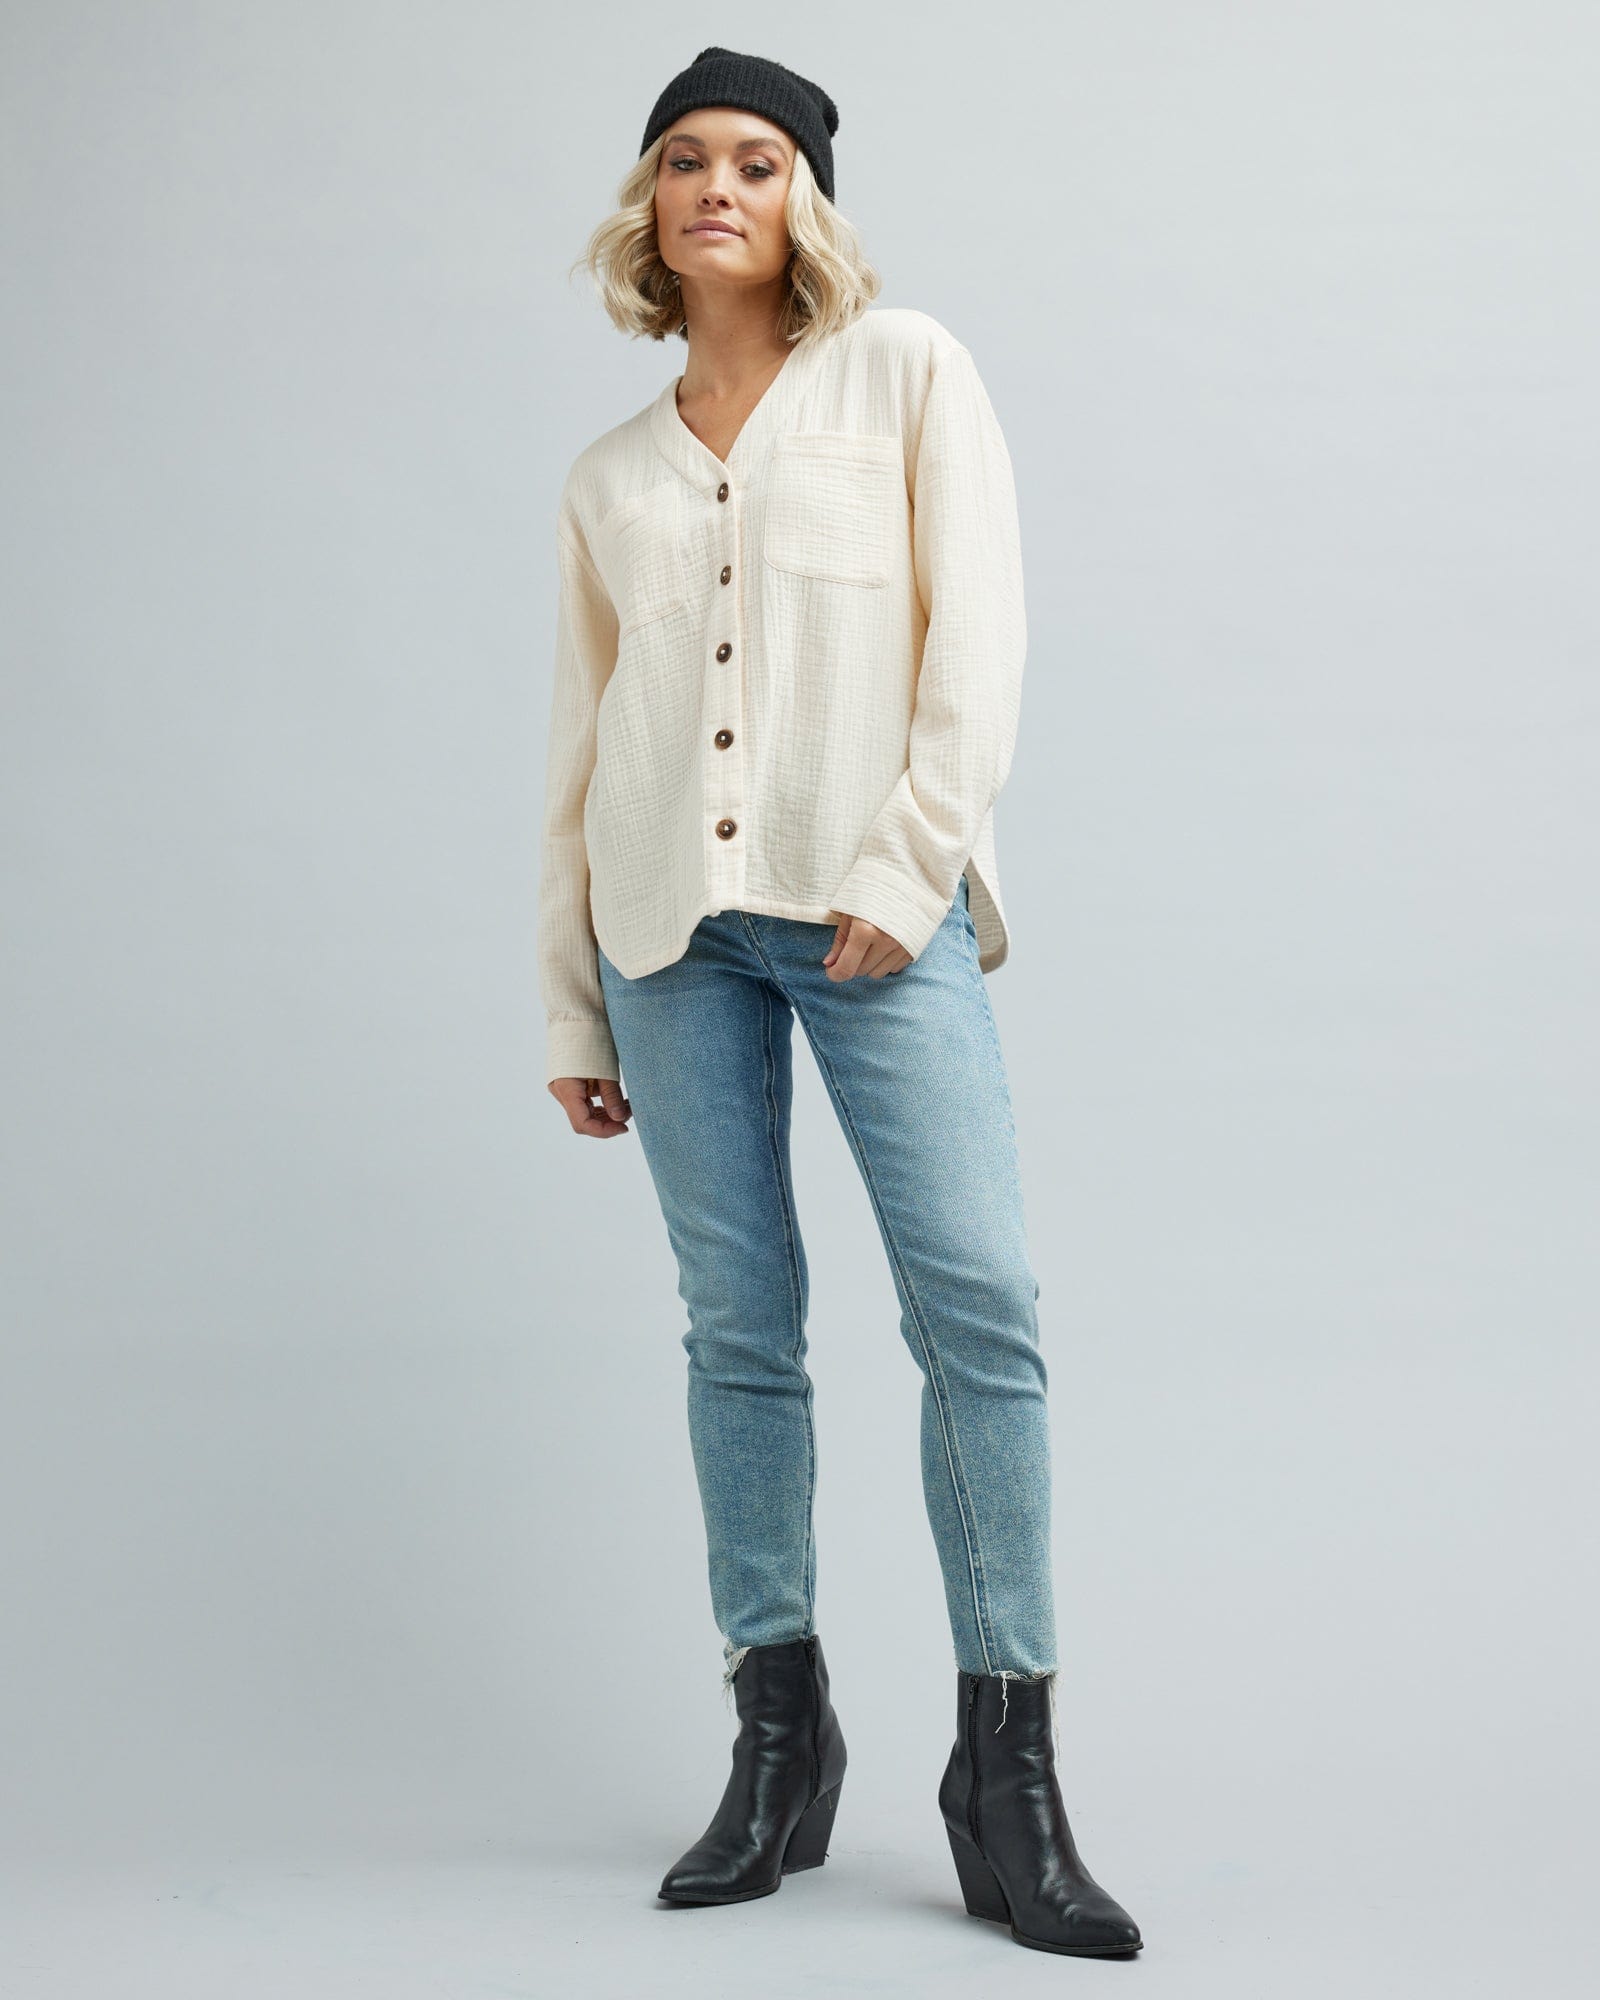 Woman in a long sleeve, white, button-down textured blouse